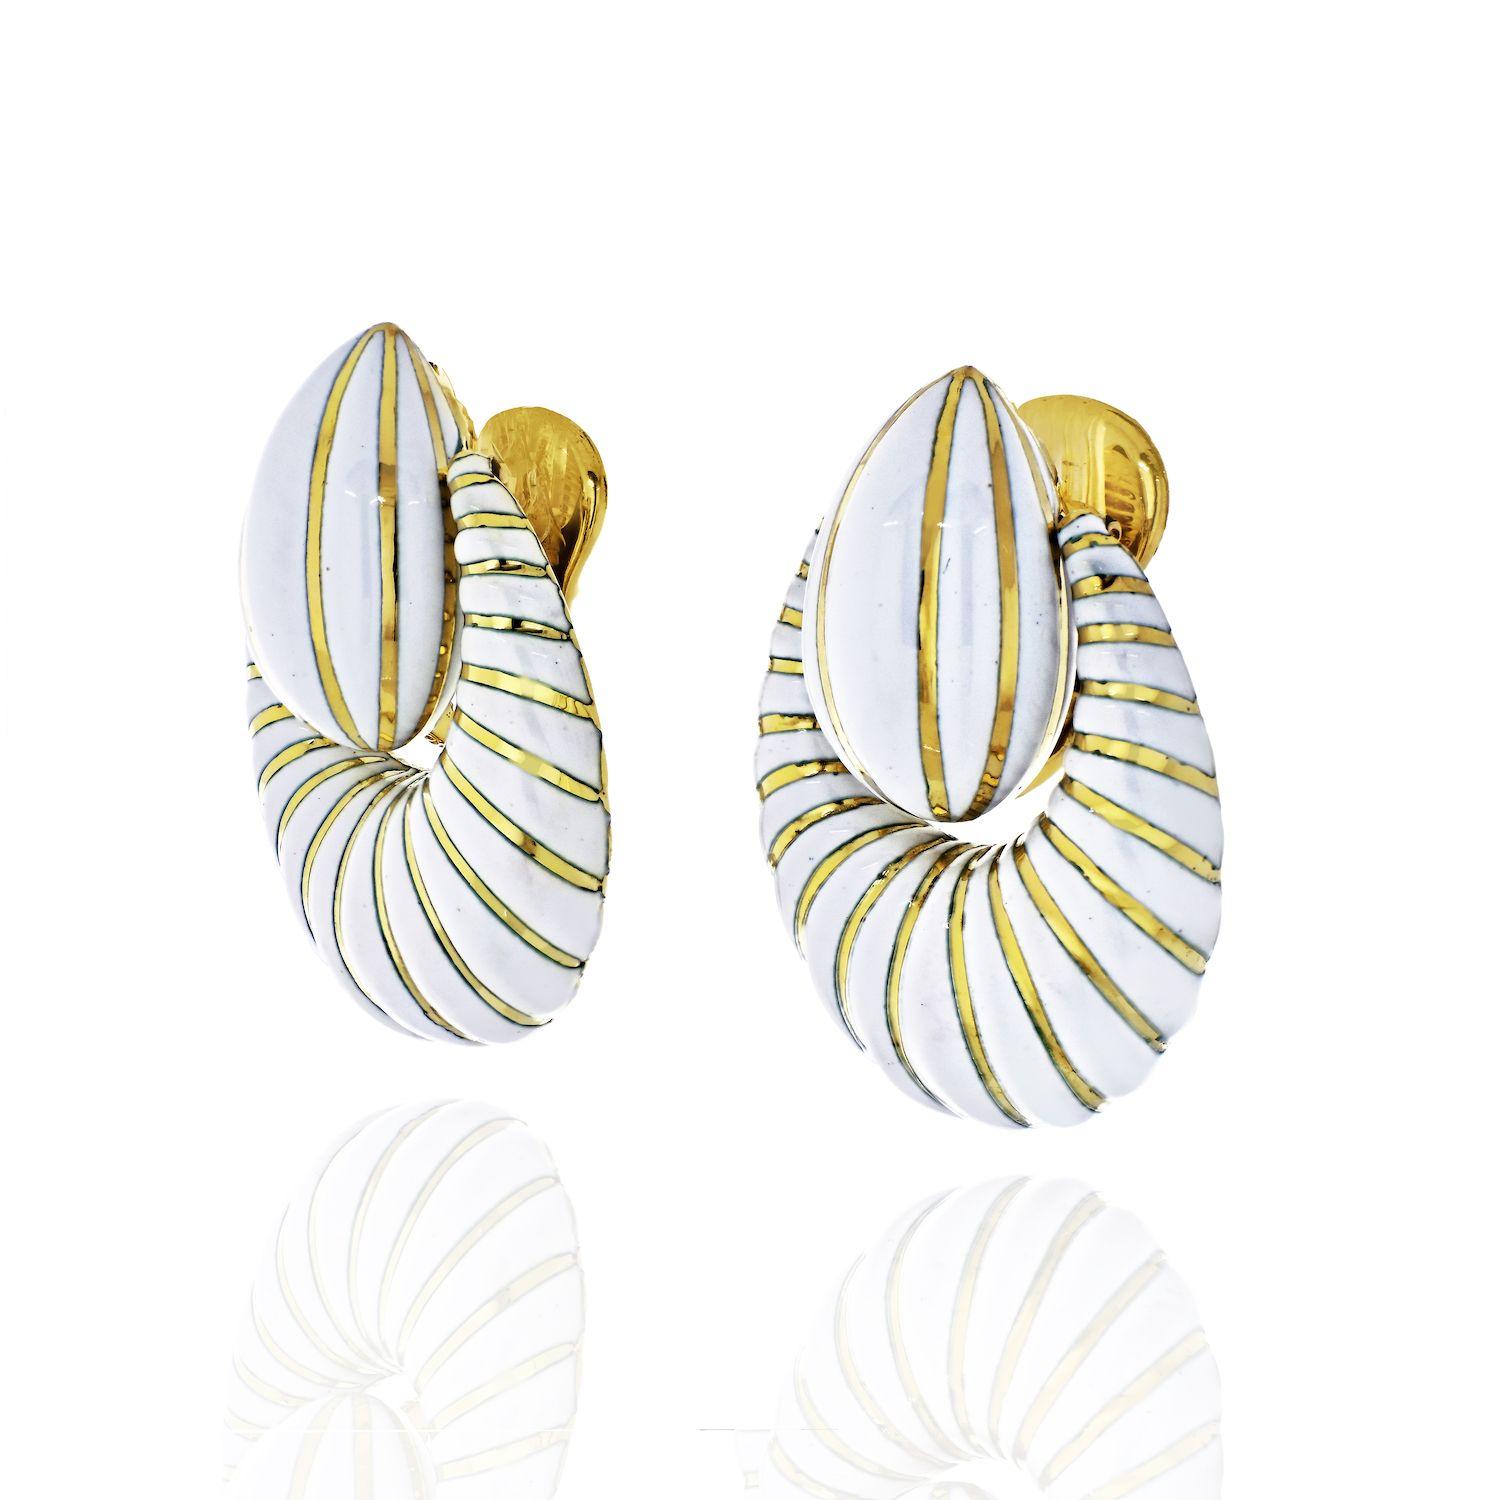 Gone are the days when white enamel earrings were considered summer jewelry. If you are like us you would want to wear these door knockers all year around. Imagine yourself wearing these with an oversized white cardigan as well as the oversized